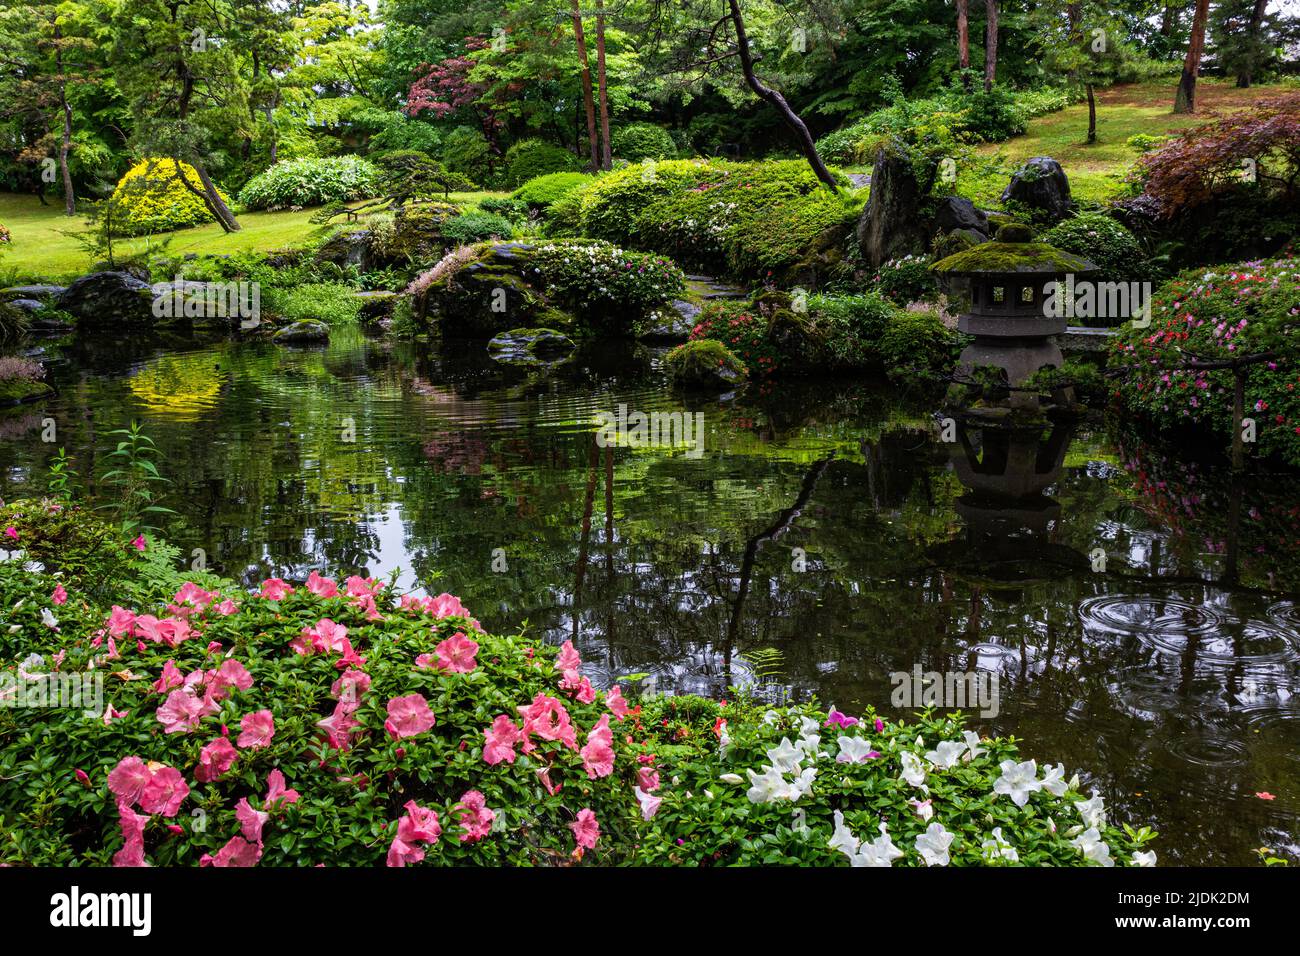 Unrei-an is a Japanese garden found within the compound of Aizu Homare Shuzo Sake distillery.  The garden was created during the Showa period.  This g Stock Photo